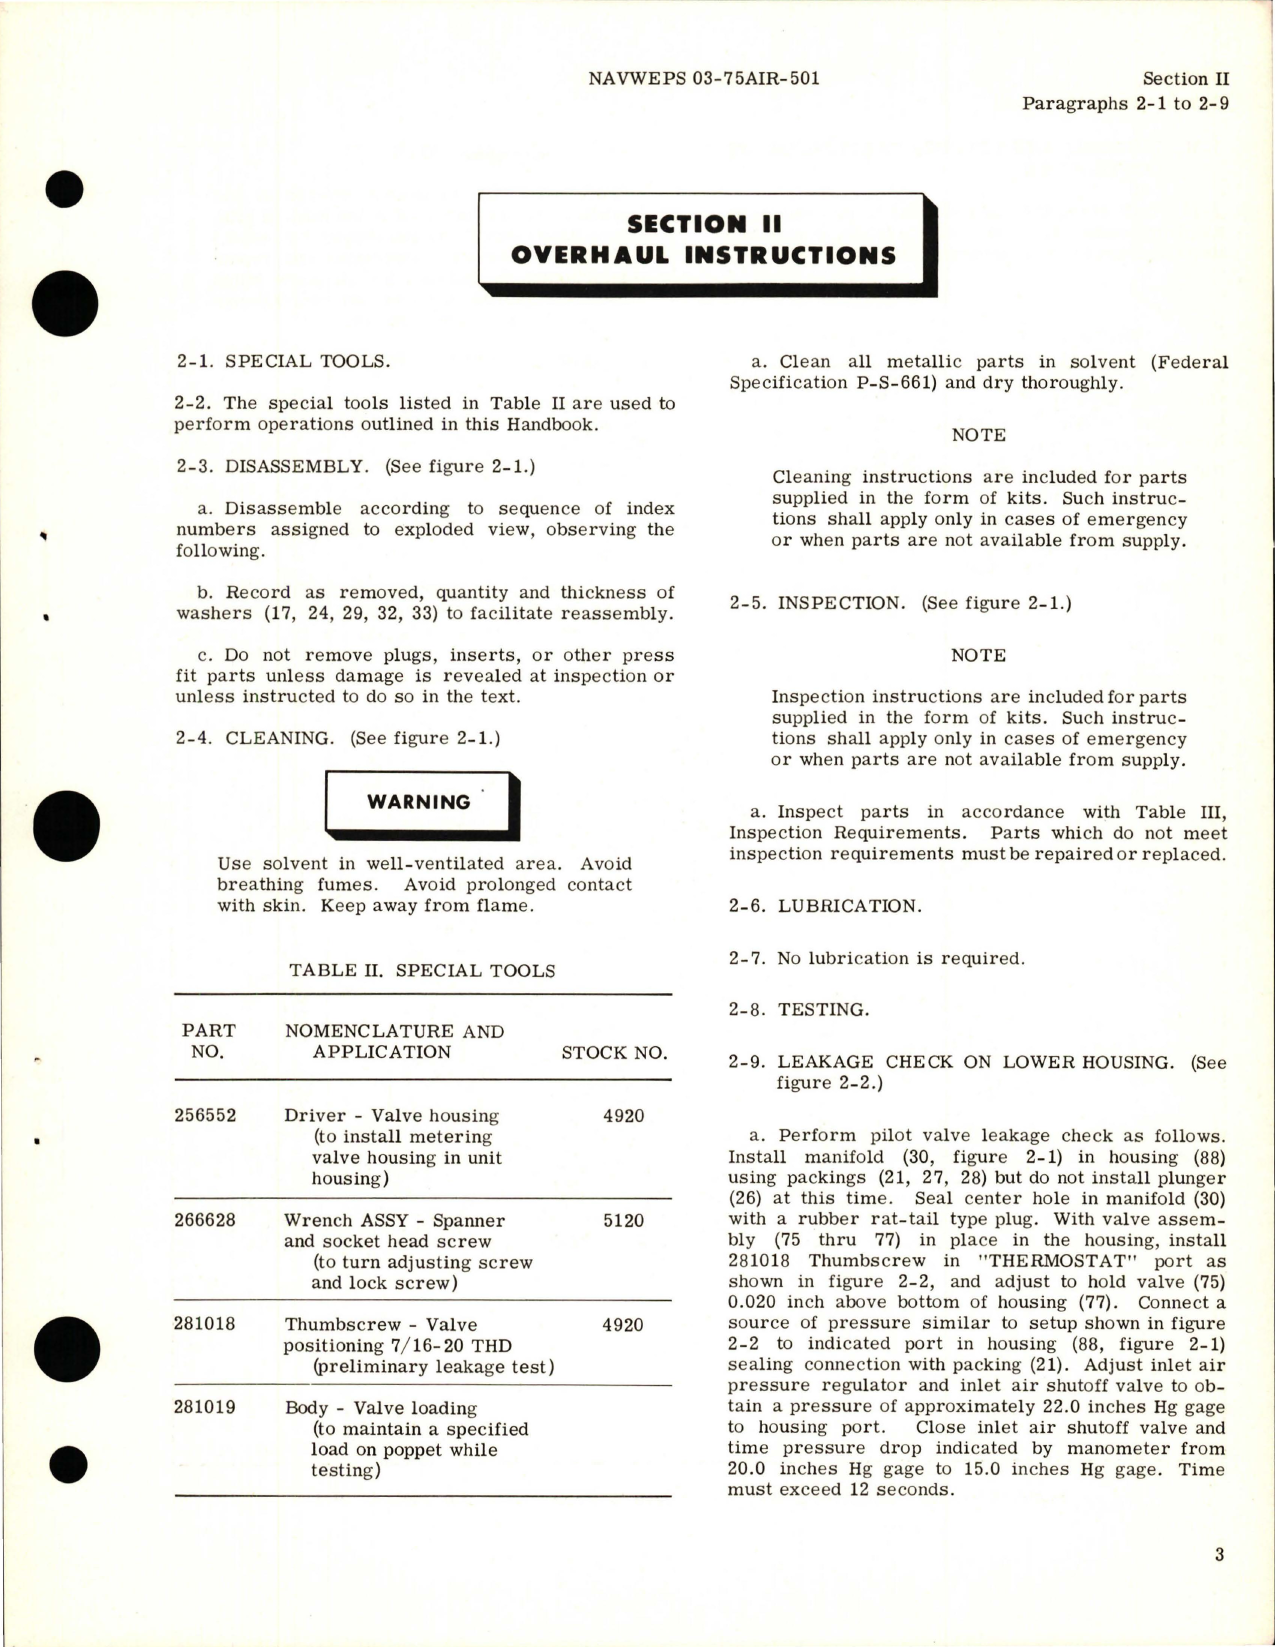 Sample page 7 from AirCorps Library document: Overhaul Instructions for Air Conditioning and Temperature Controller - Part 106078 and SR 8